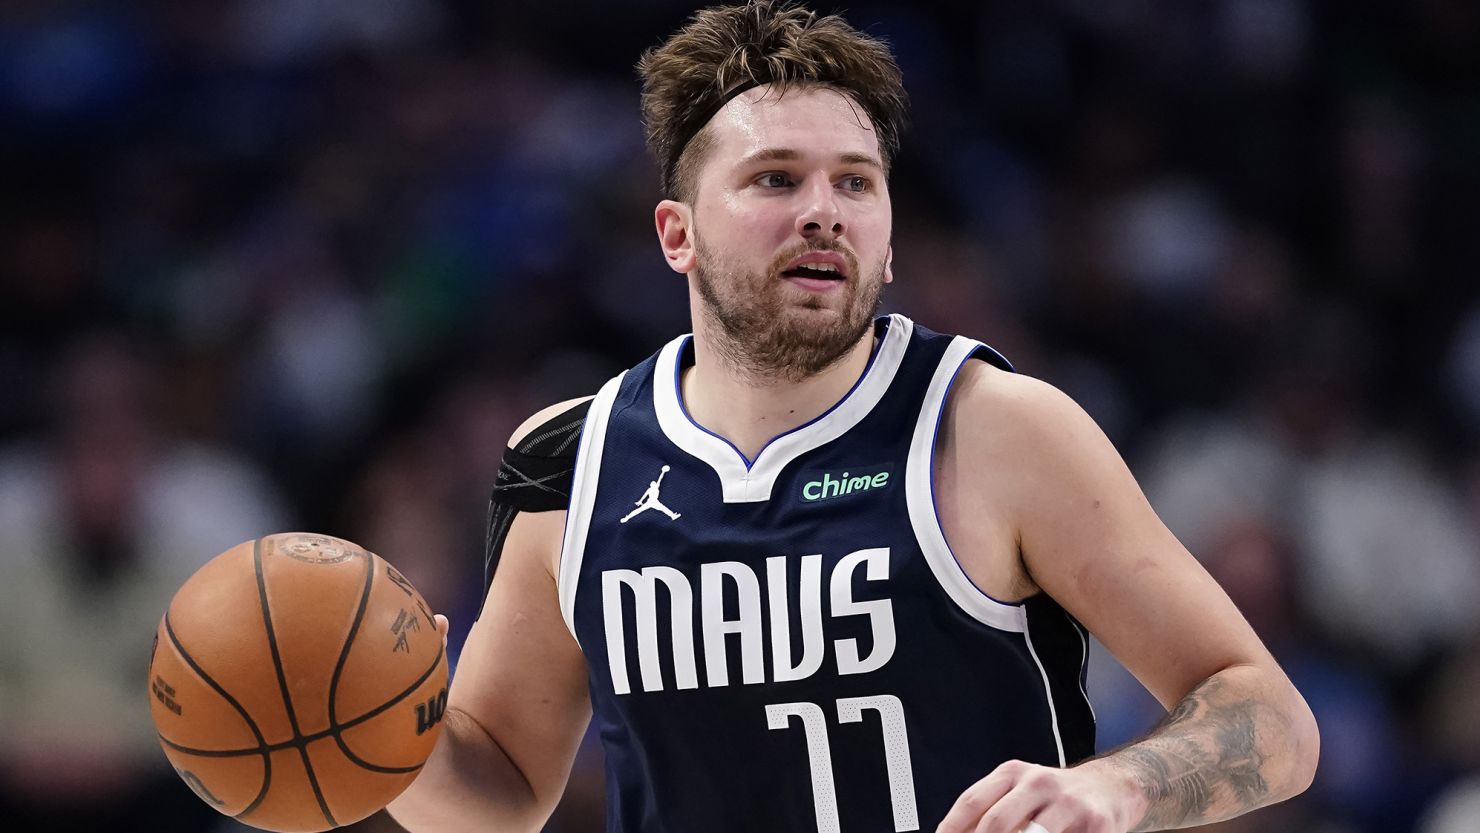 Watch Courtside Footage Of Luka Doncic Calling Celtics Fan’s Mom Unpleasant Name During Dallas Mavericks Game 5 Loss